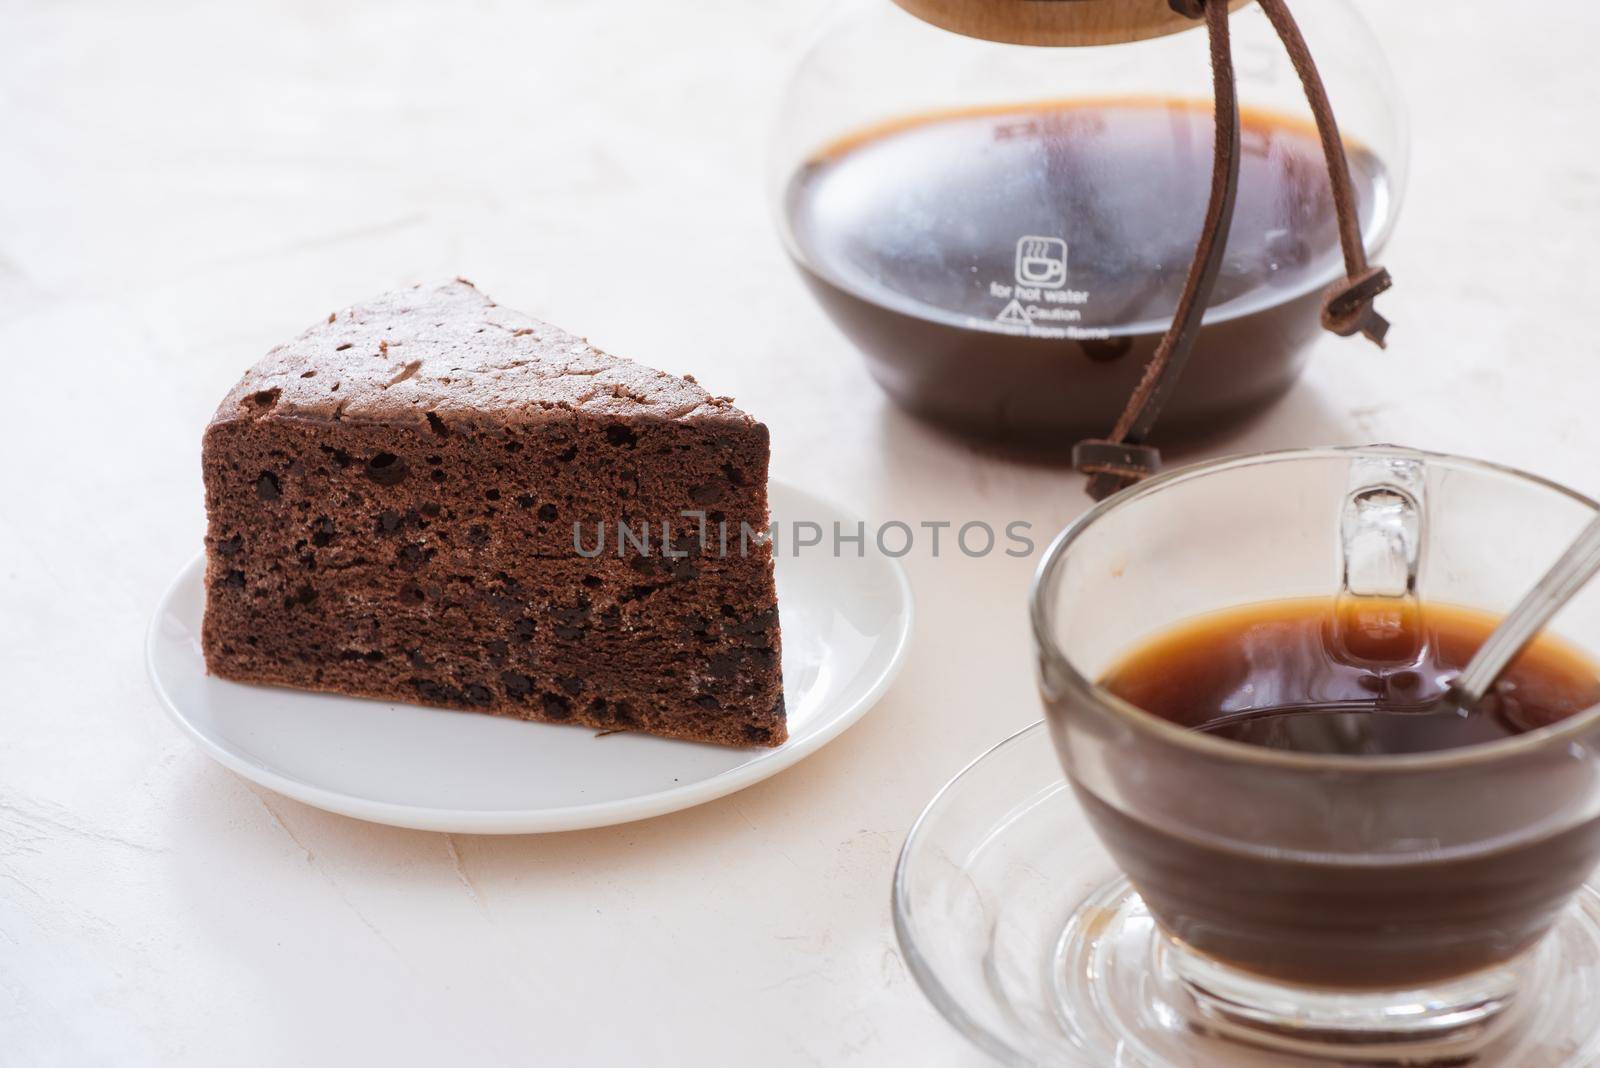 Drip coffee (dripper) and drip ground coffee with glass drip pot, cup and chocolate cake by makidotvn